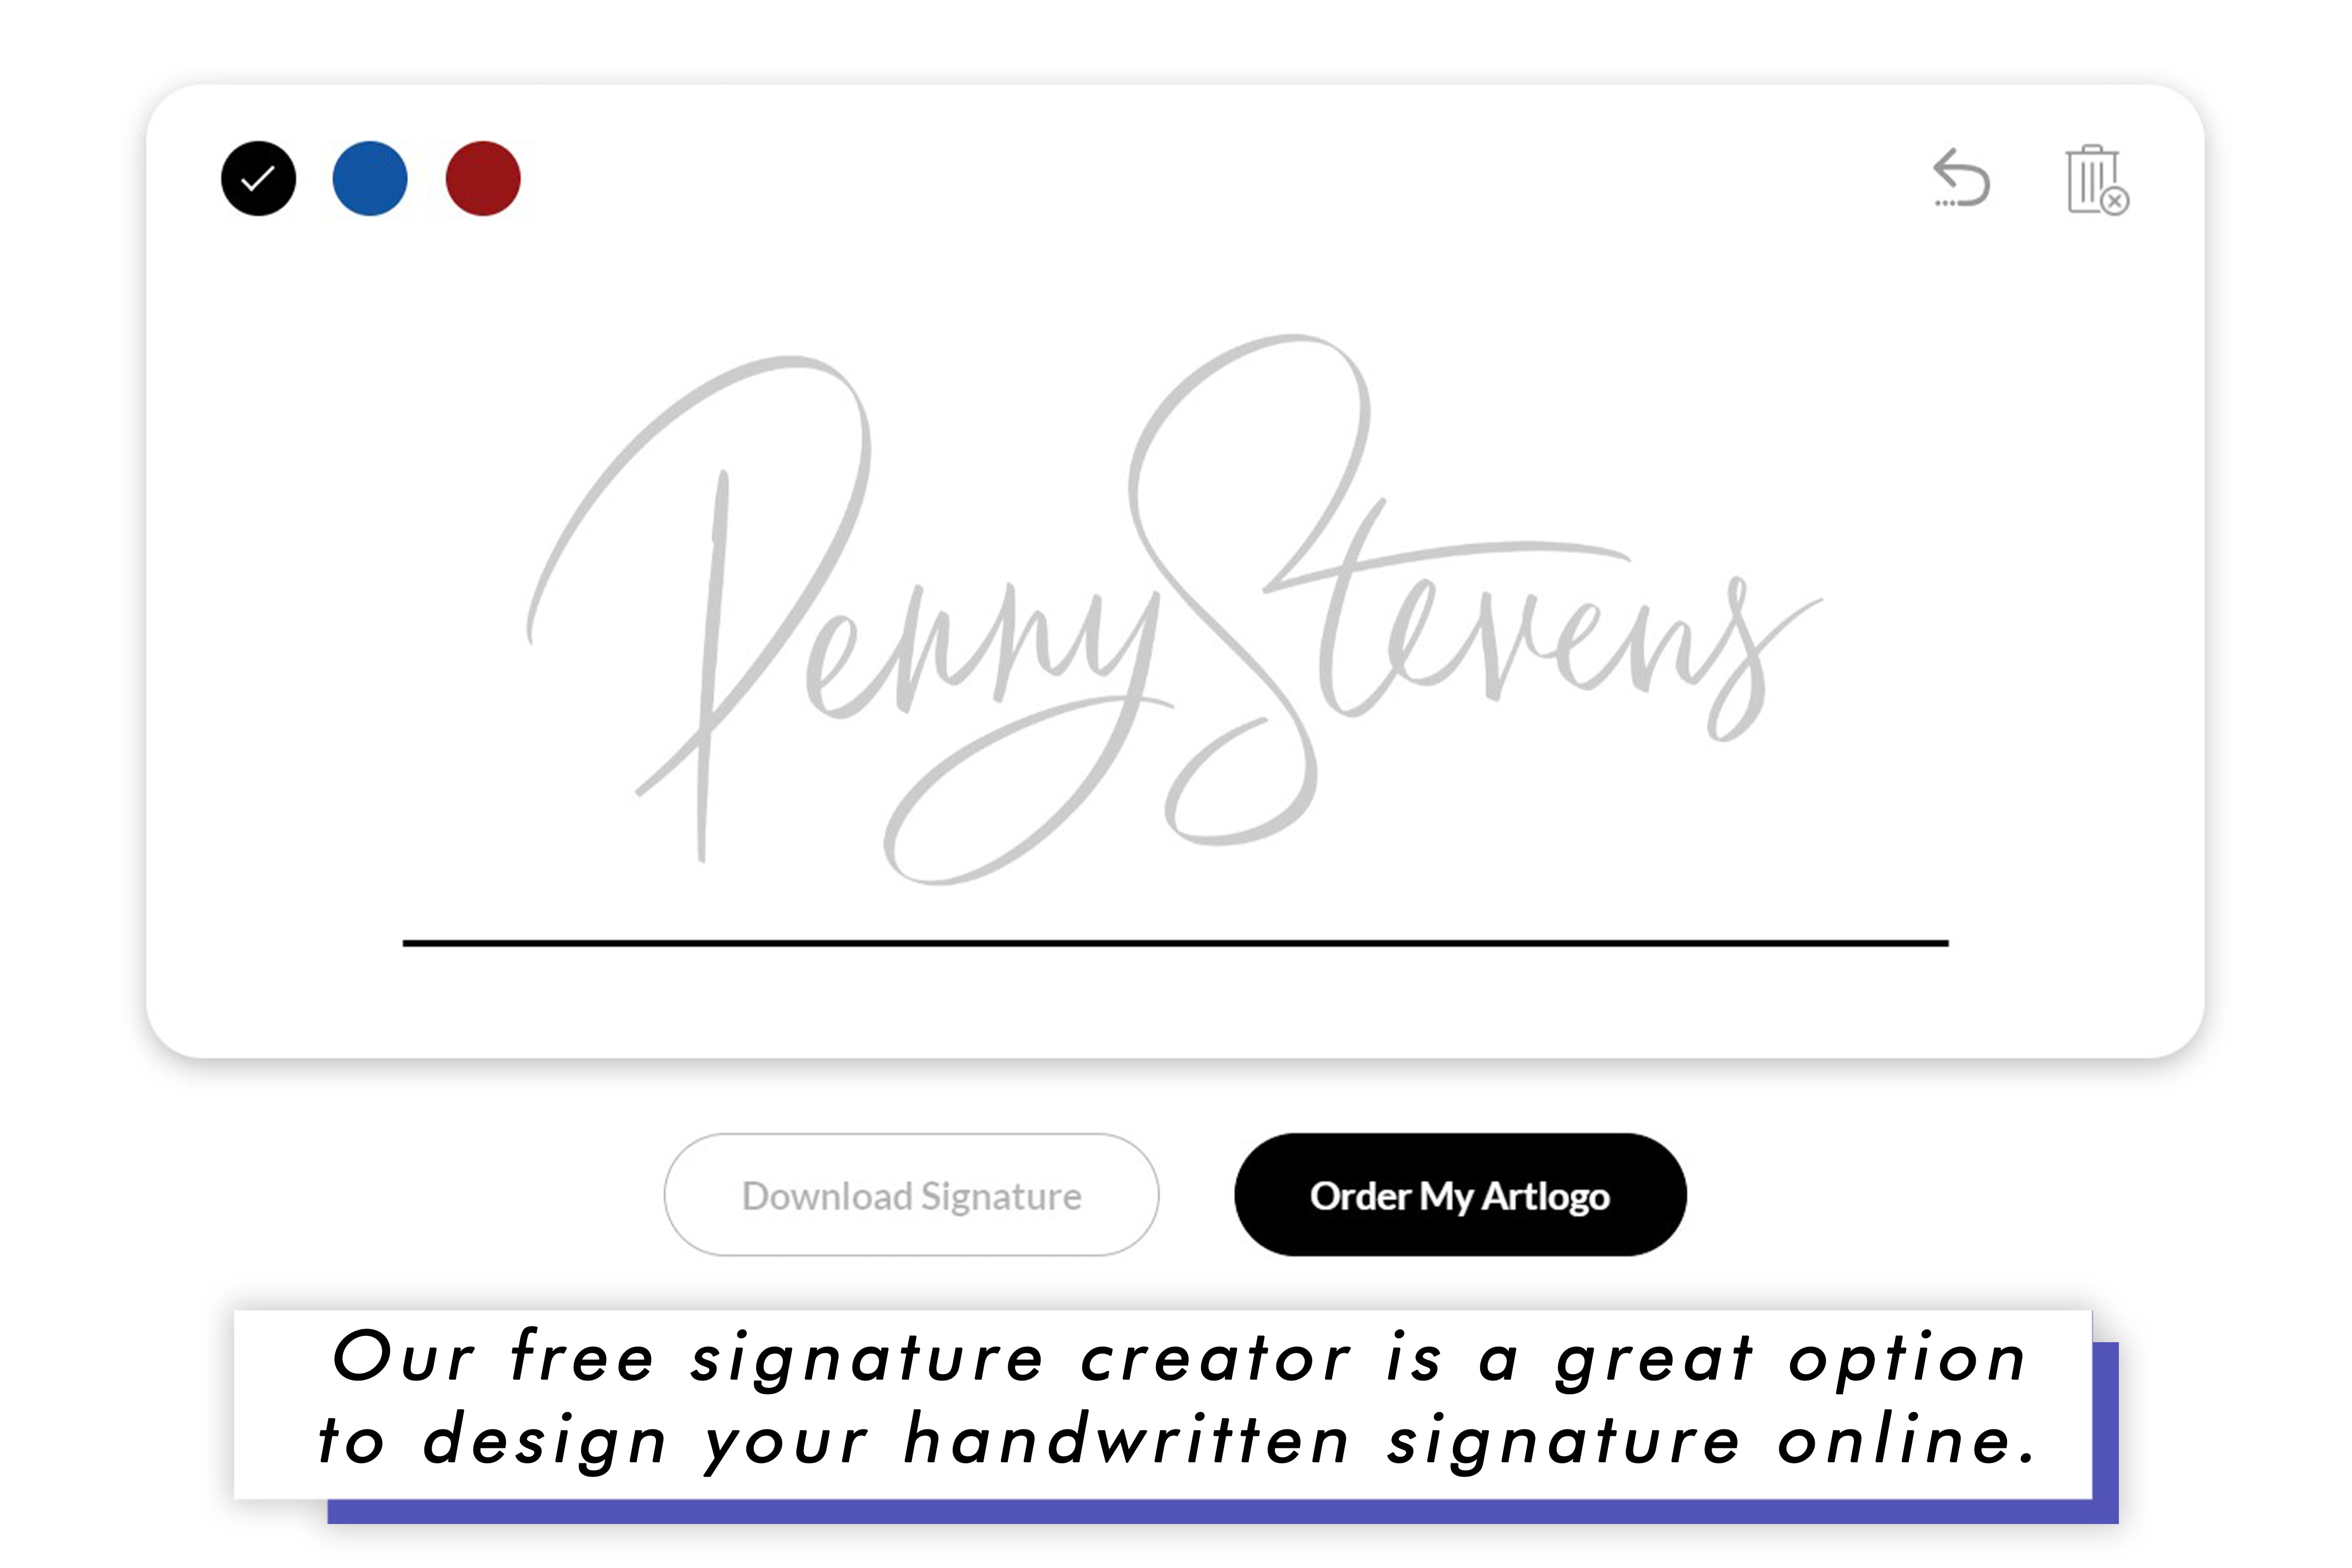 Our free signature creator is a great option to design your handwritten signature onli